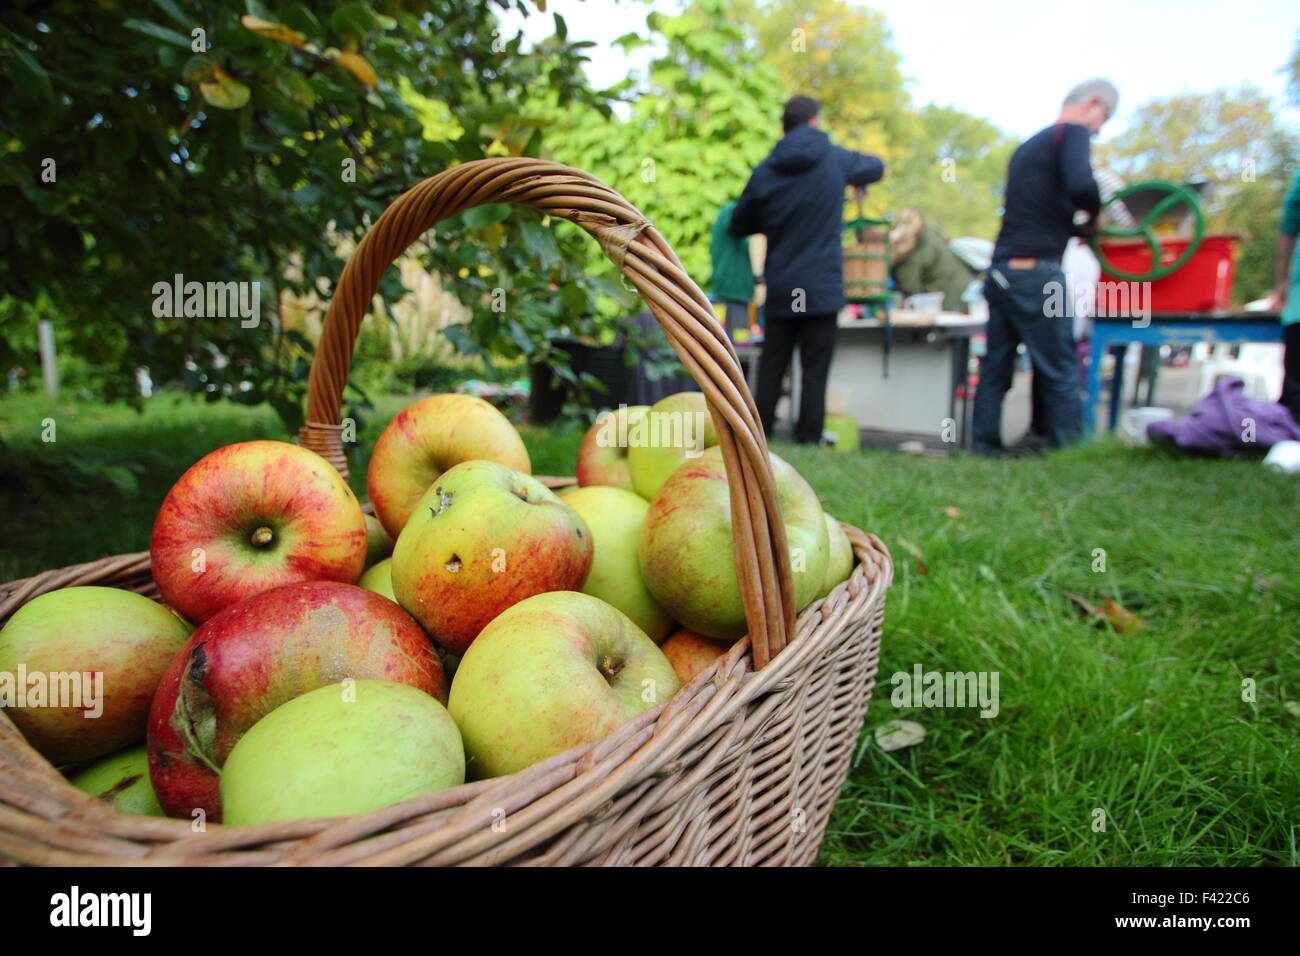 Freshly picked English apples gathered for pressing  (pictured) at a community Apple Day event in Sheffield South Yorkshire UK Stock Photo